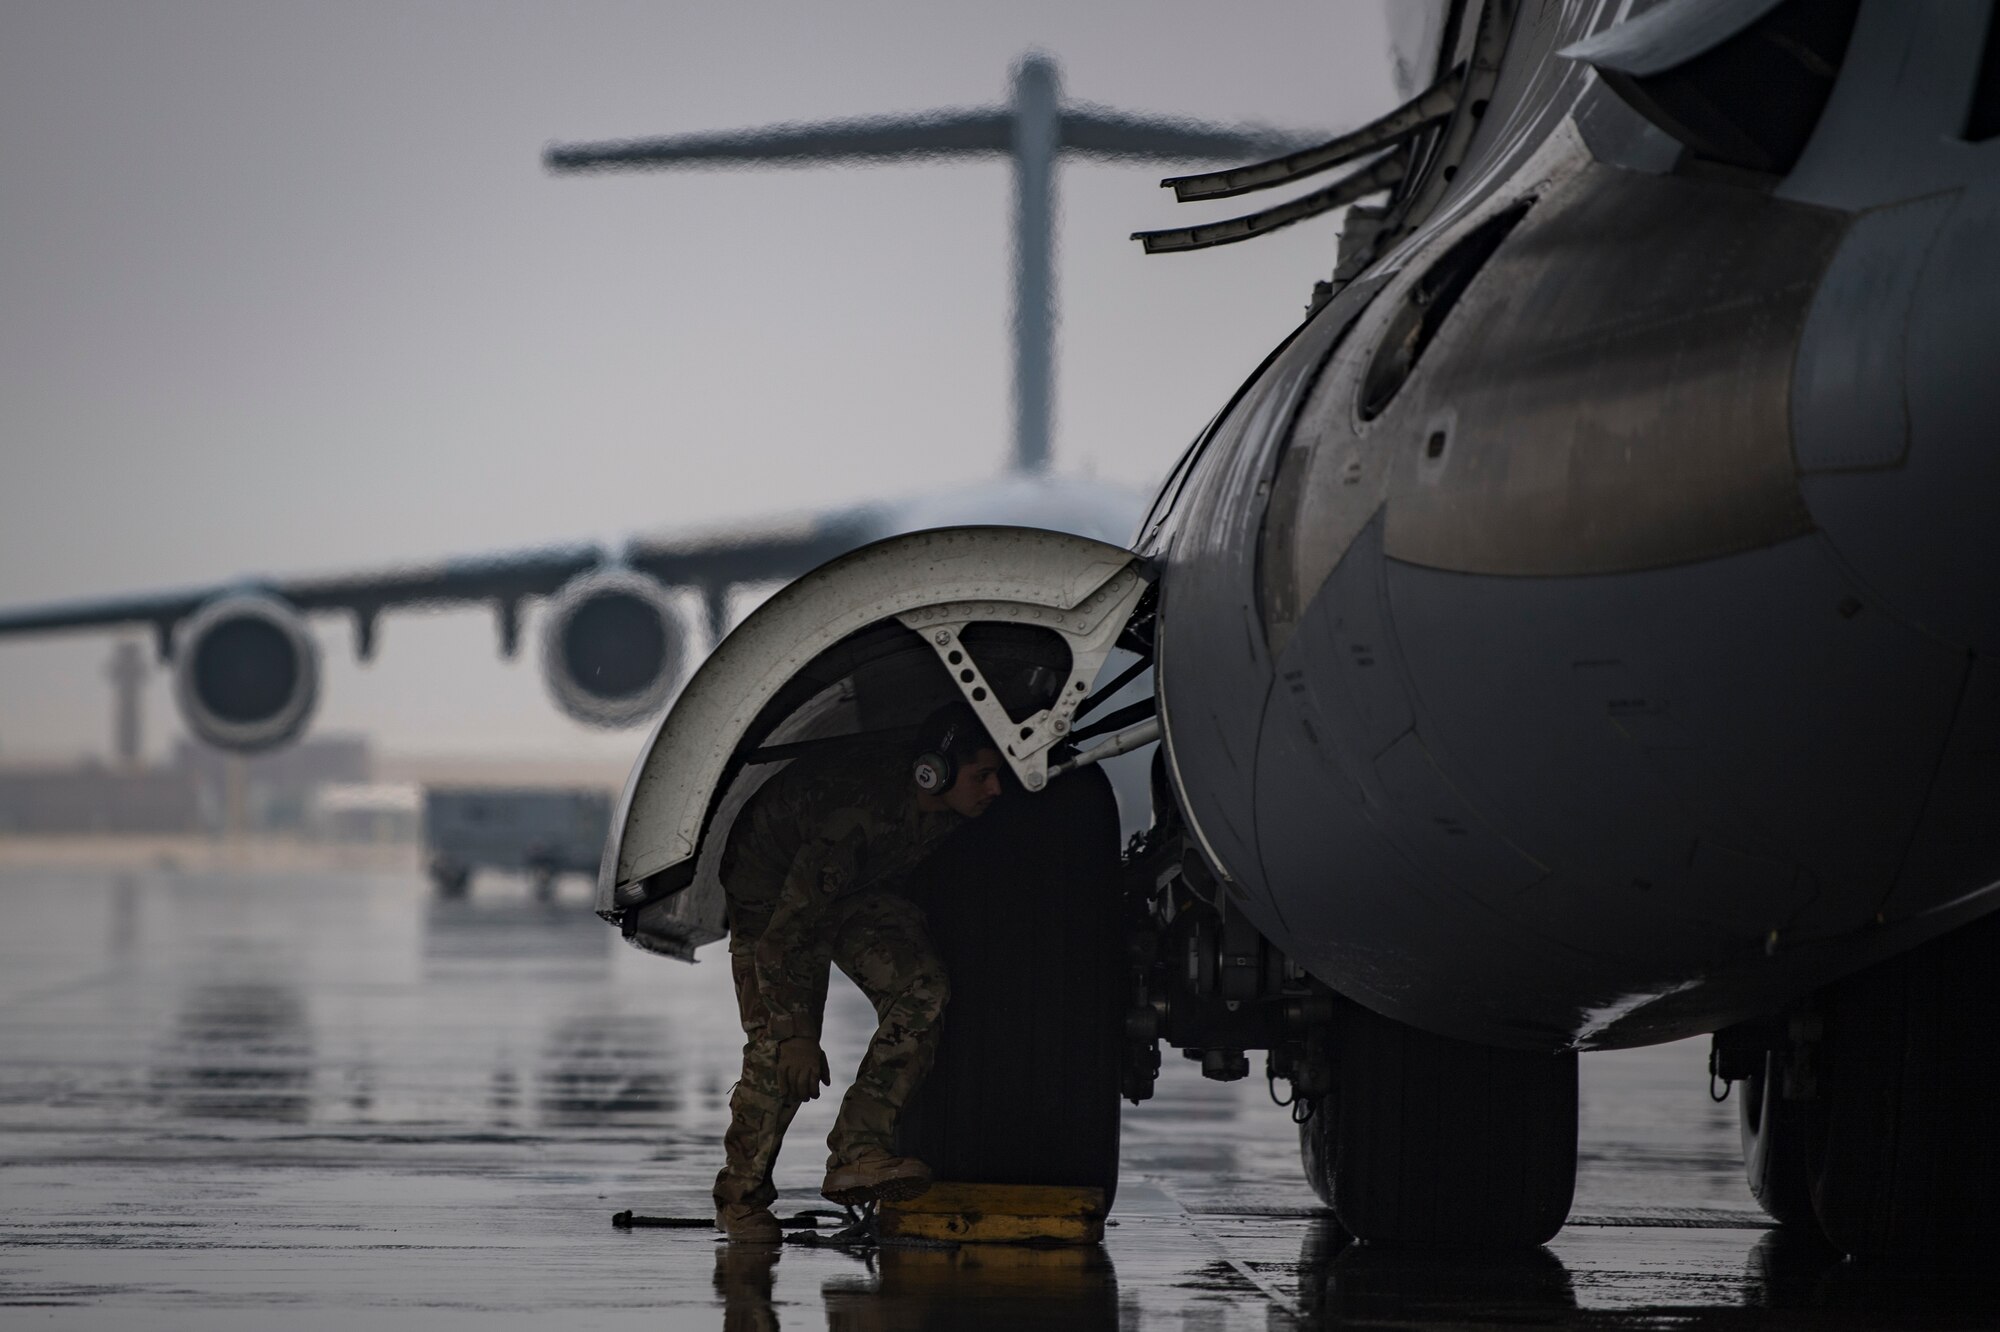 A U.S. Air Force flying crew chief assigned to the 816th Expeditionary Airlift Squadron conducts preflight checks of a U.S. Air Force C-17 Globemaster III at Al Udeid Air Base, Qatar, Jan. 10, 2020.